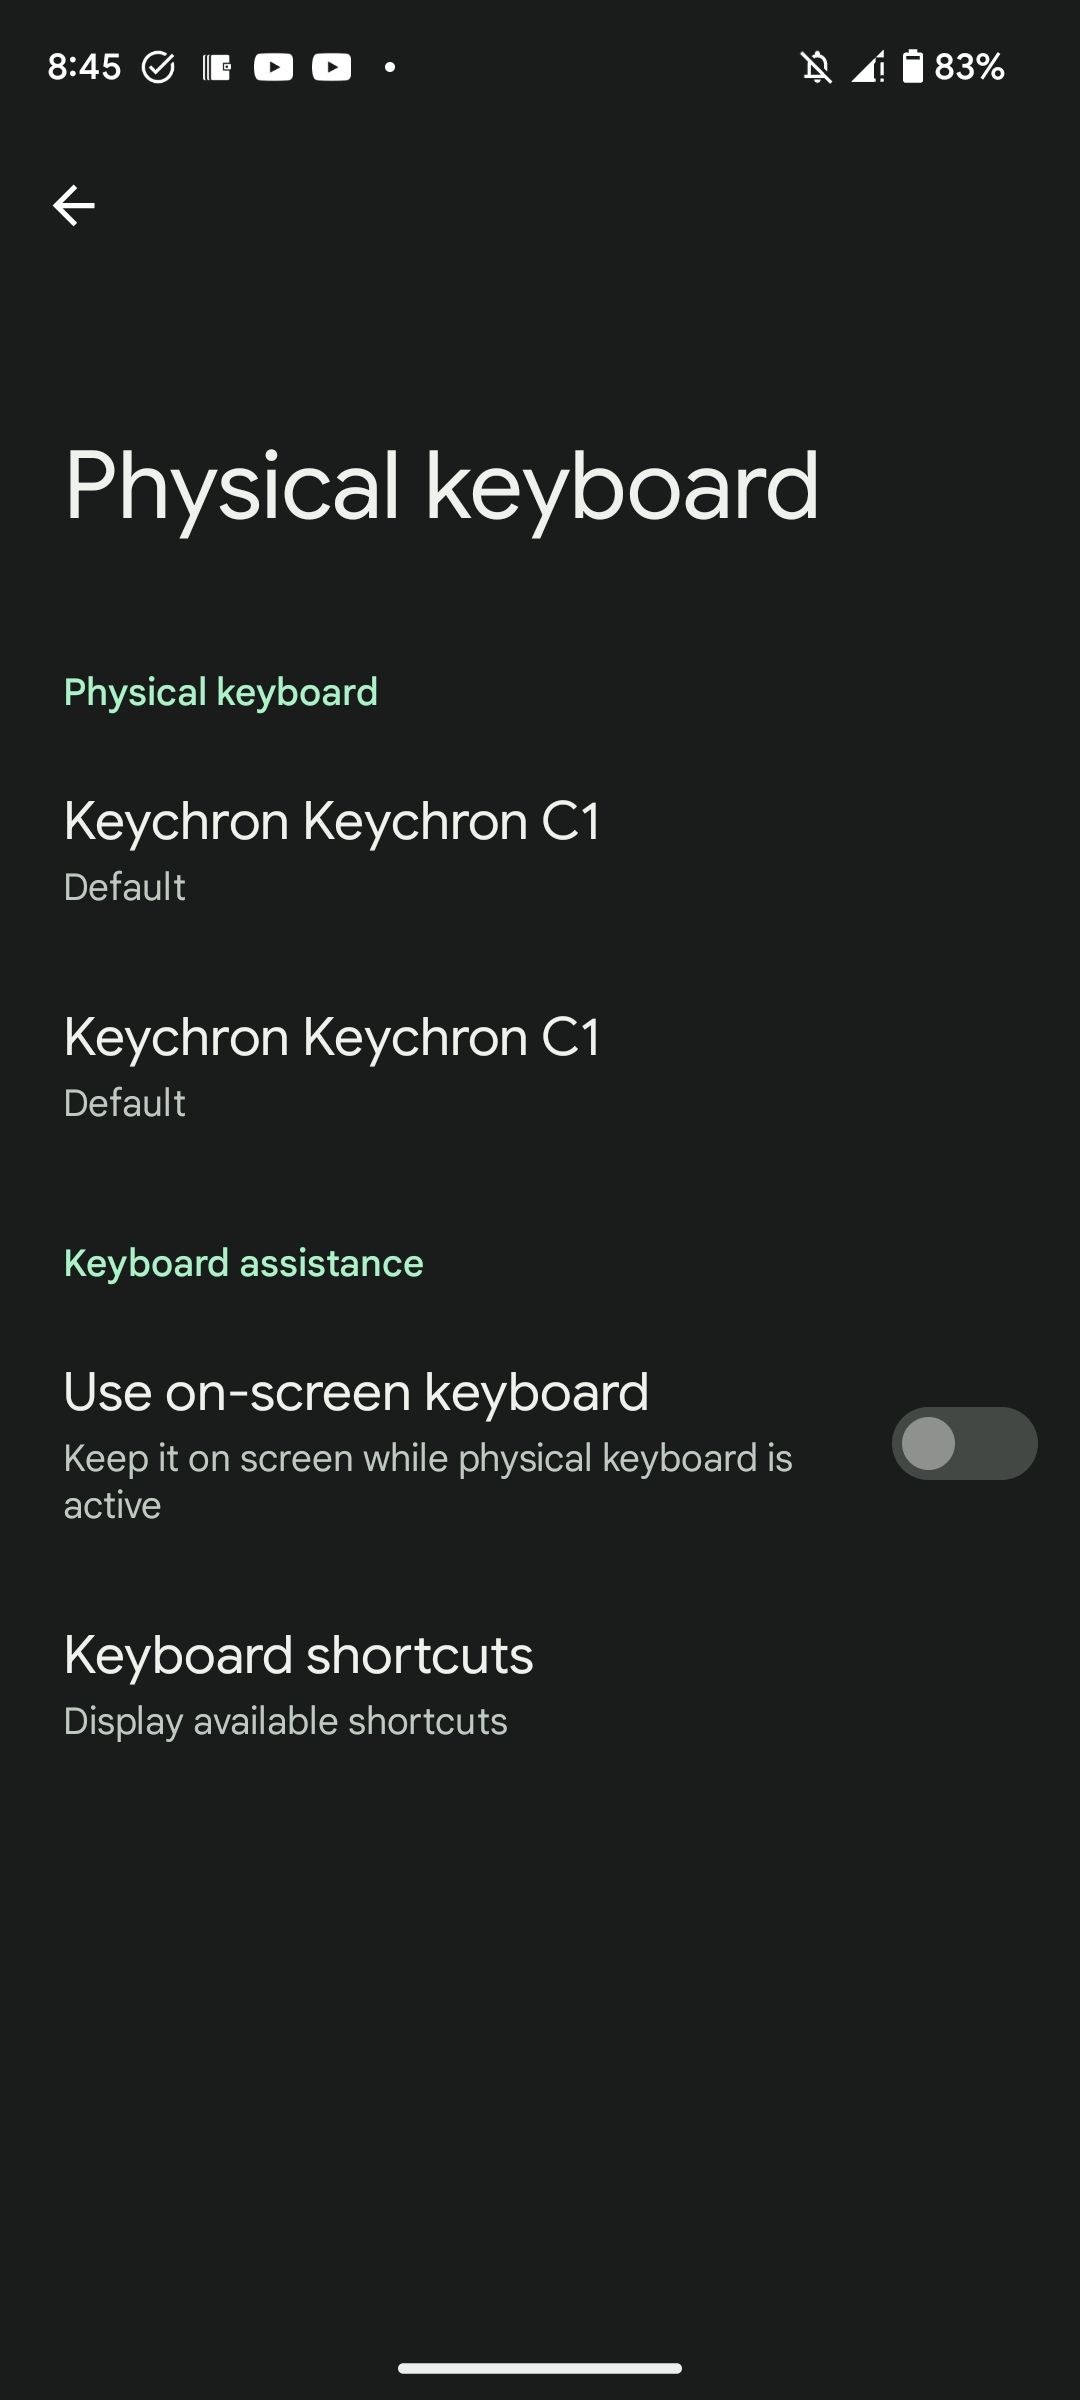 A physical keyboard connected to an Android phone